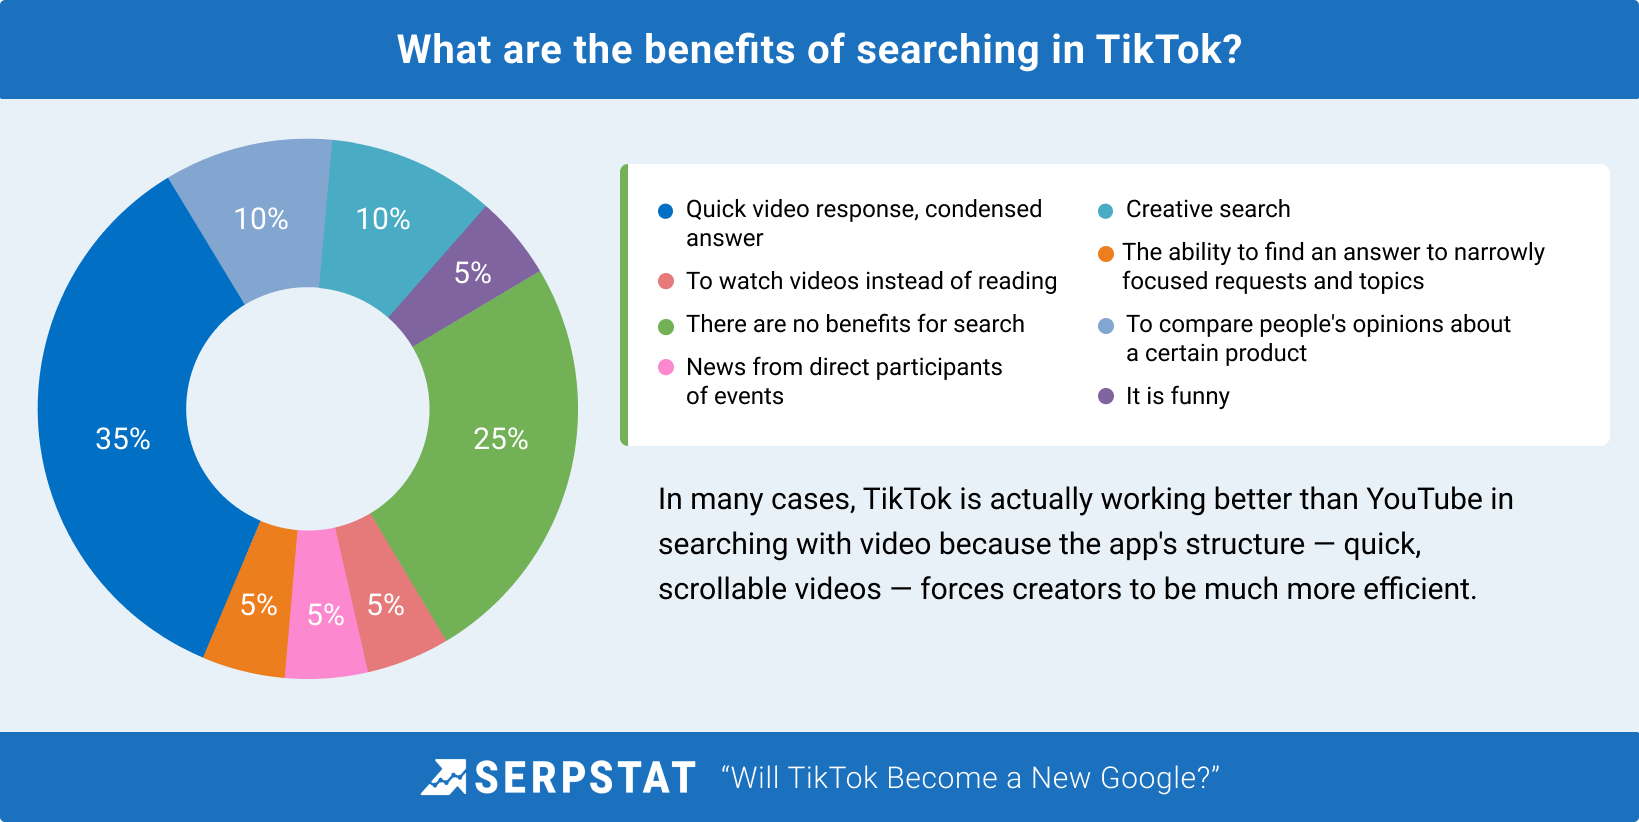 Benefits of TikTok for search